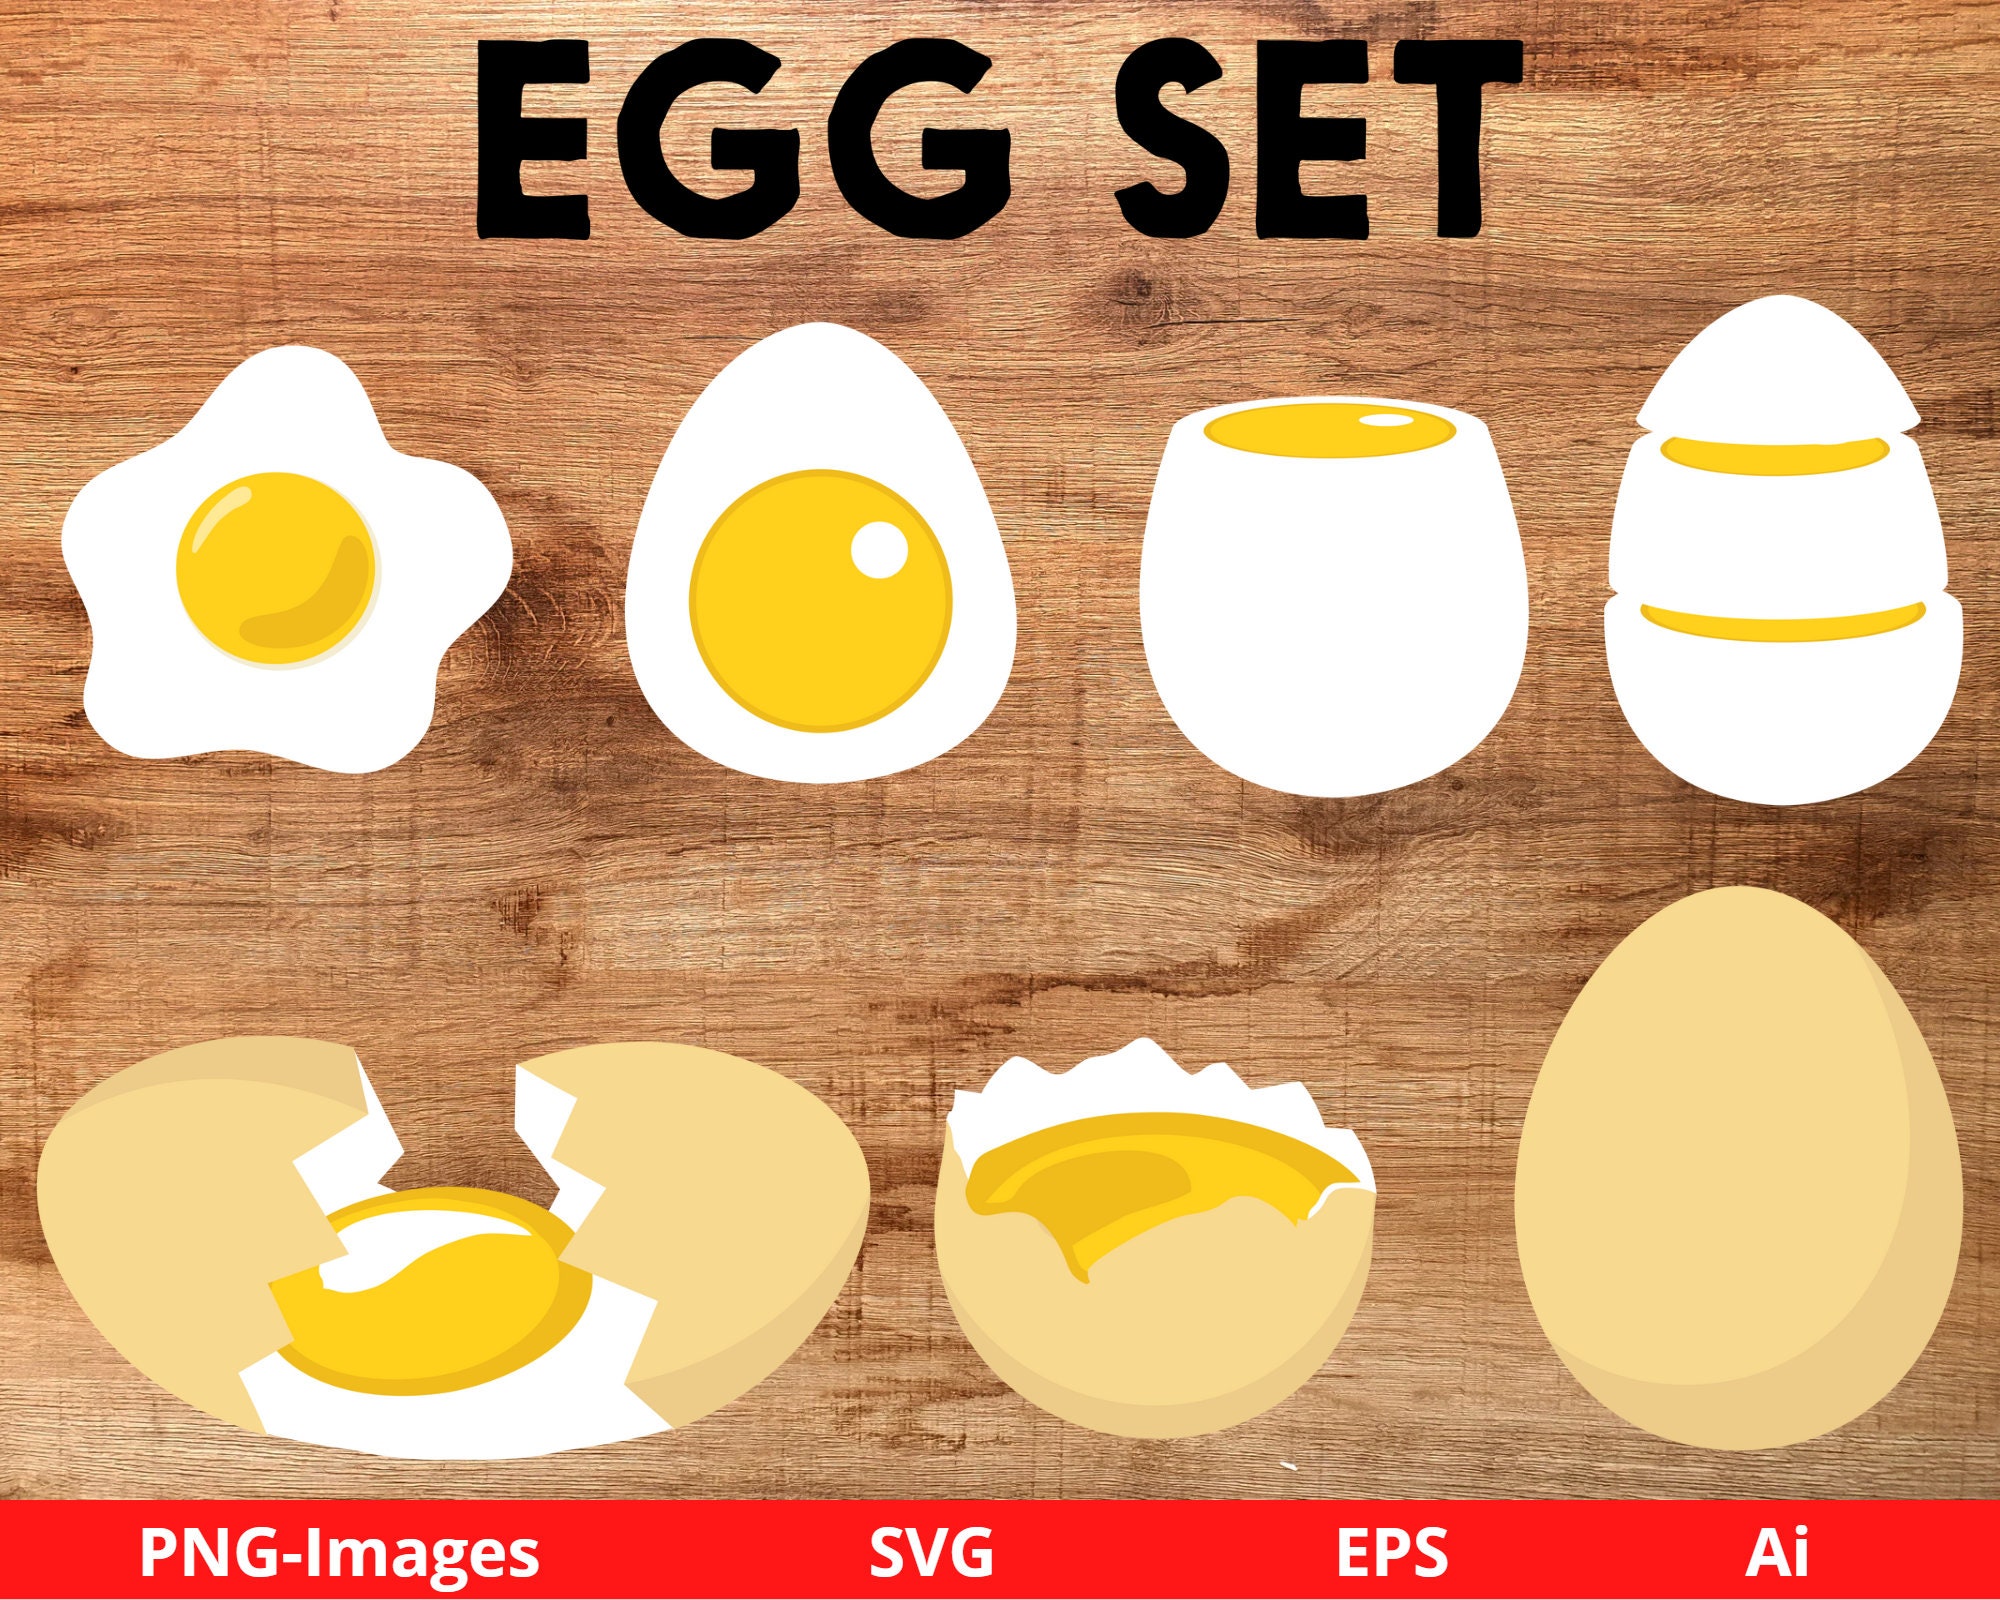 Two Fried Eggs clipart. Free download transparent .PNG